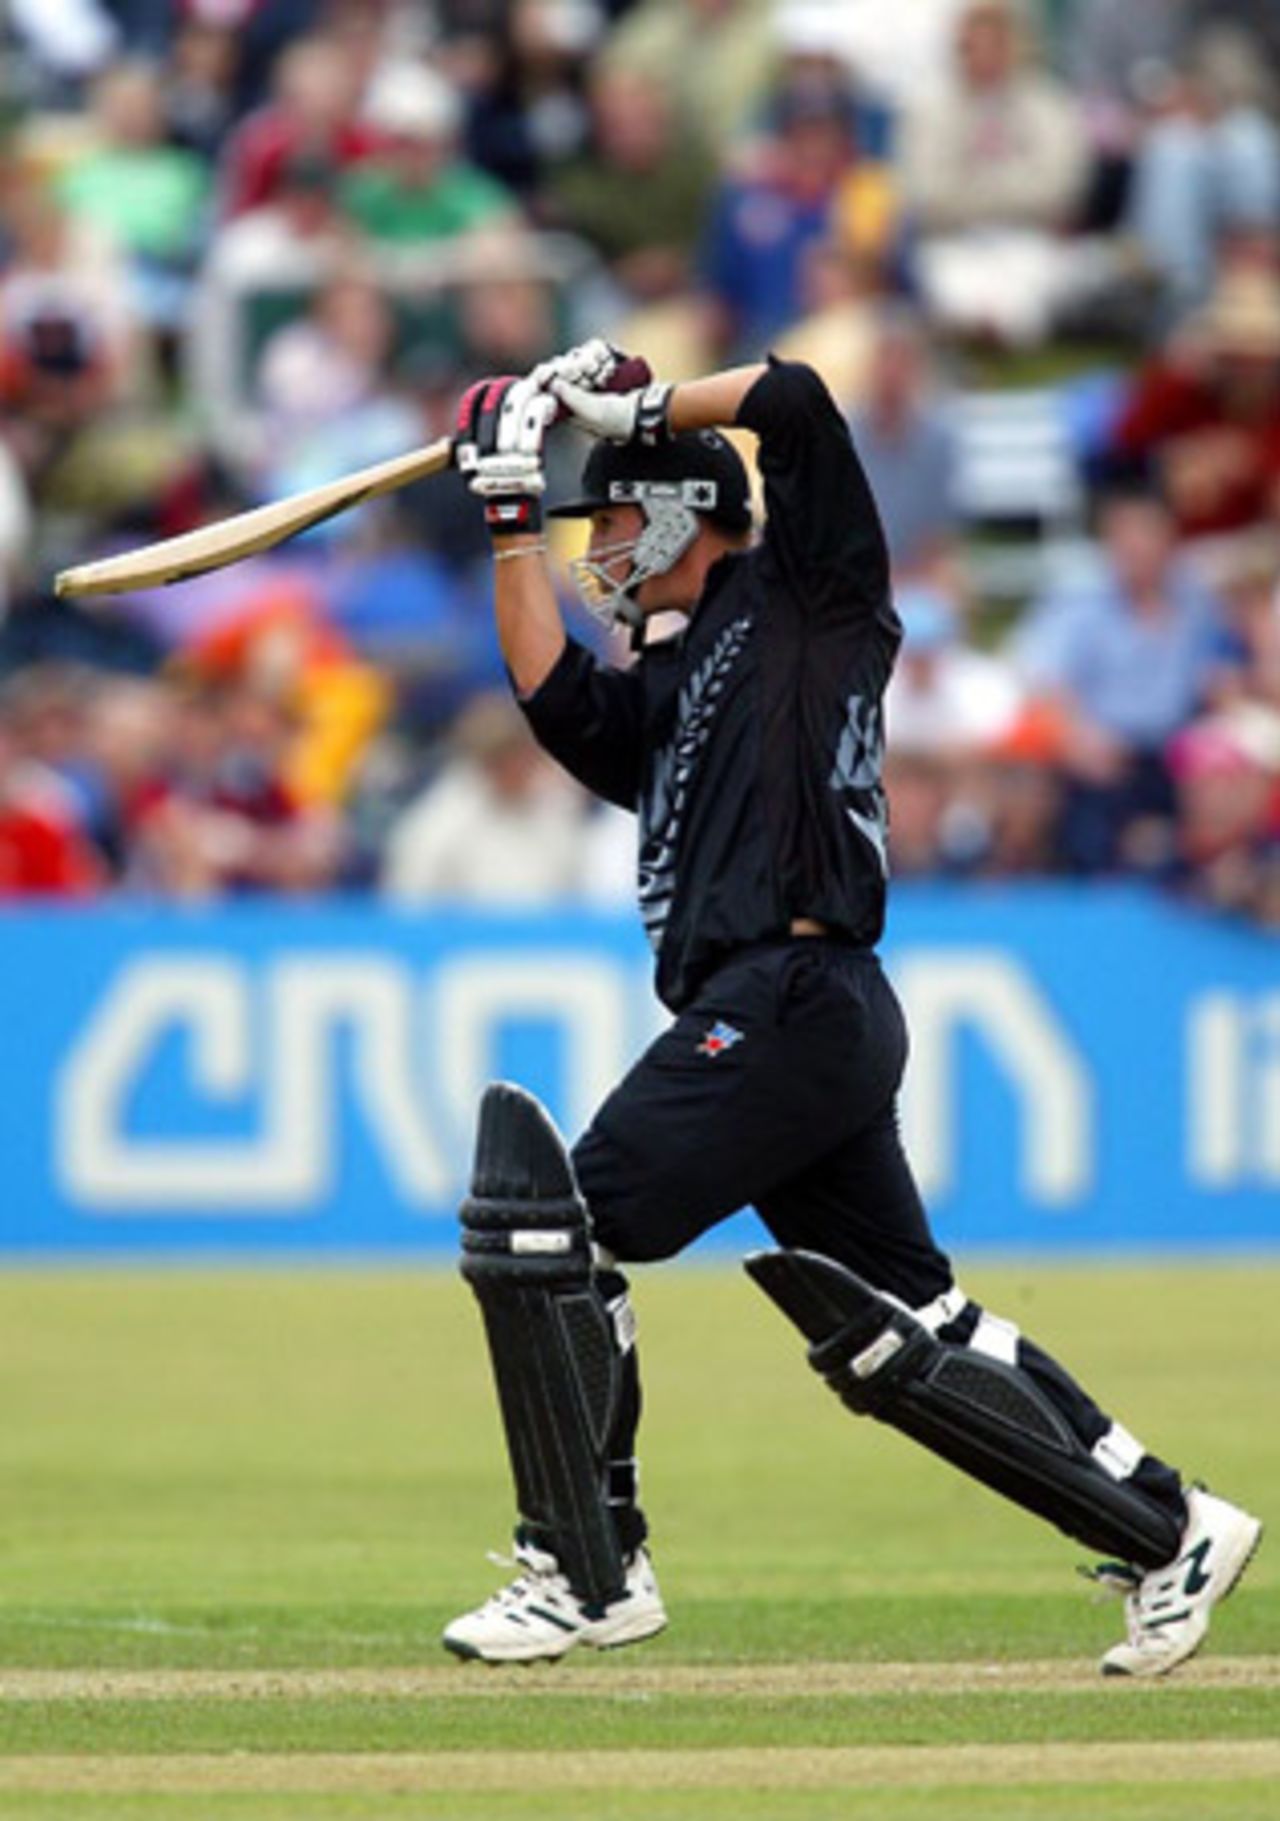 New Zealand batsman Mathew Sinclair drives a delivery straight down the ground during his innings of 32 not out. 4th ODI: New Zealand v India at John Davies Oval, Queenstown, 4 January 2003.